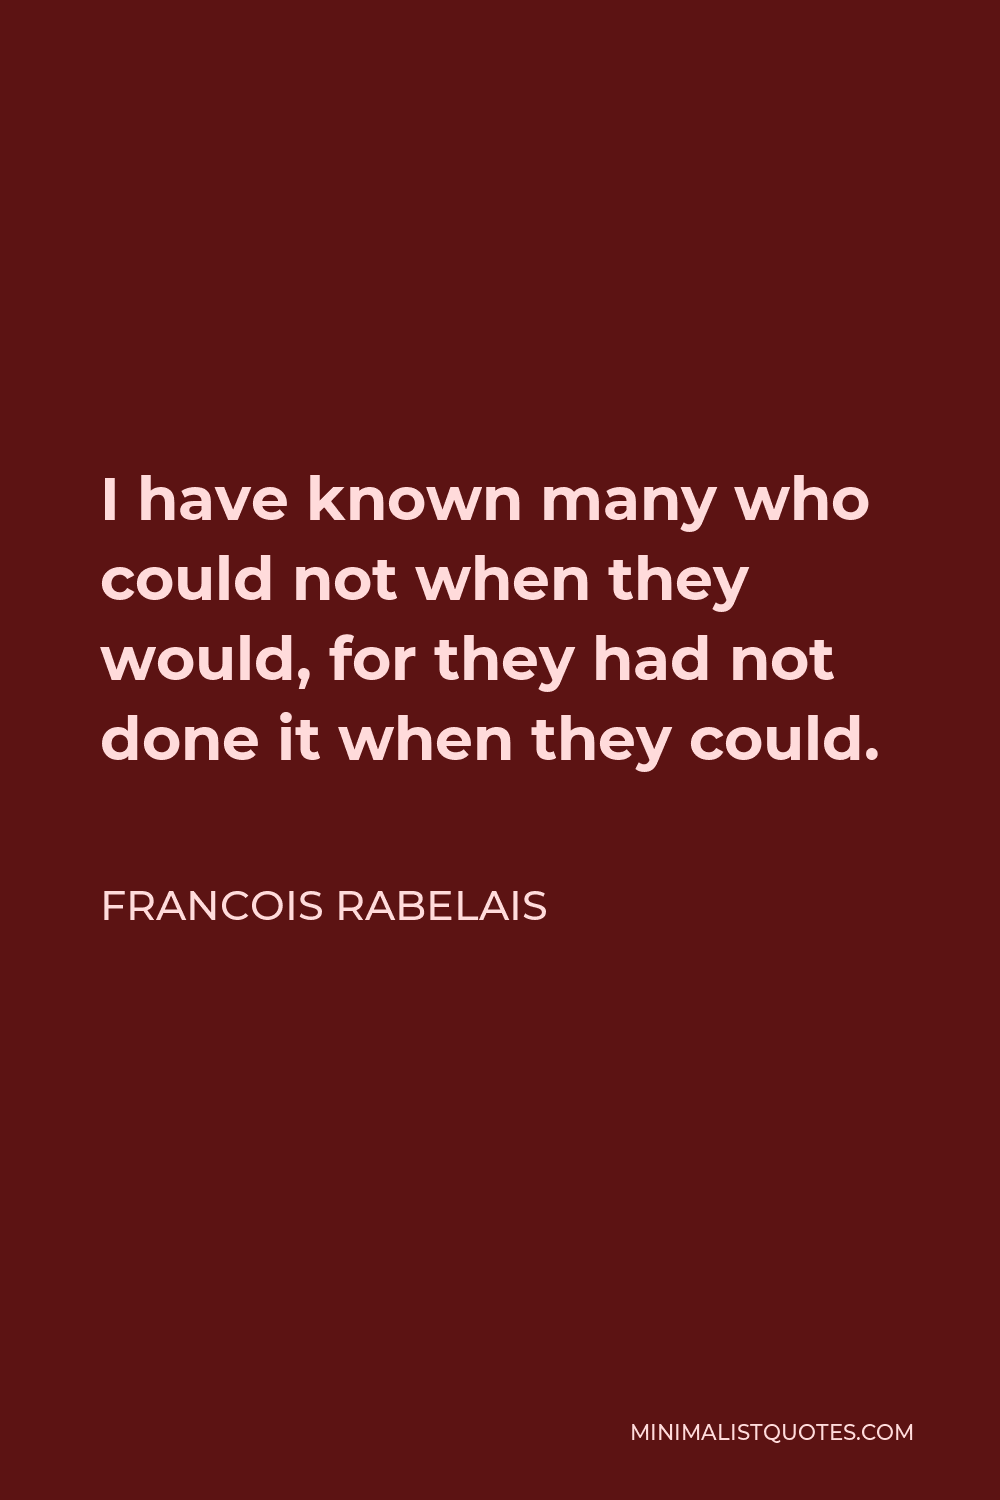 Francois Rabelais Quote - I have known many who could not when they would, for they had not done it when they could.